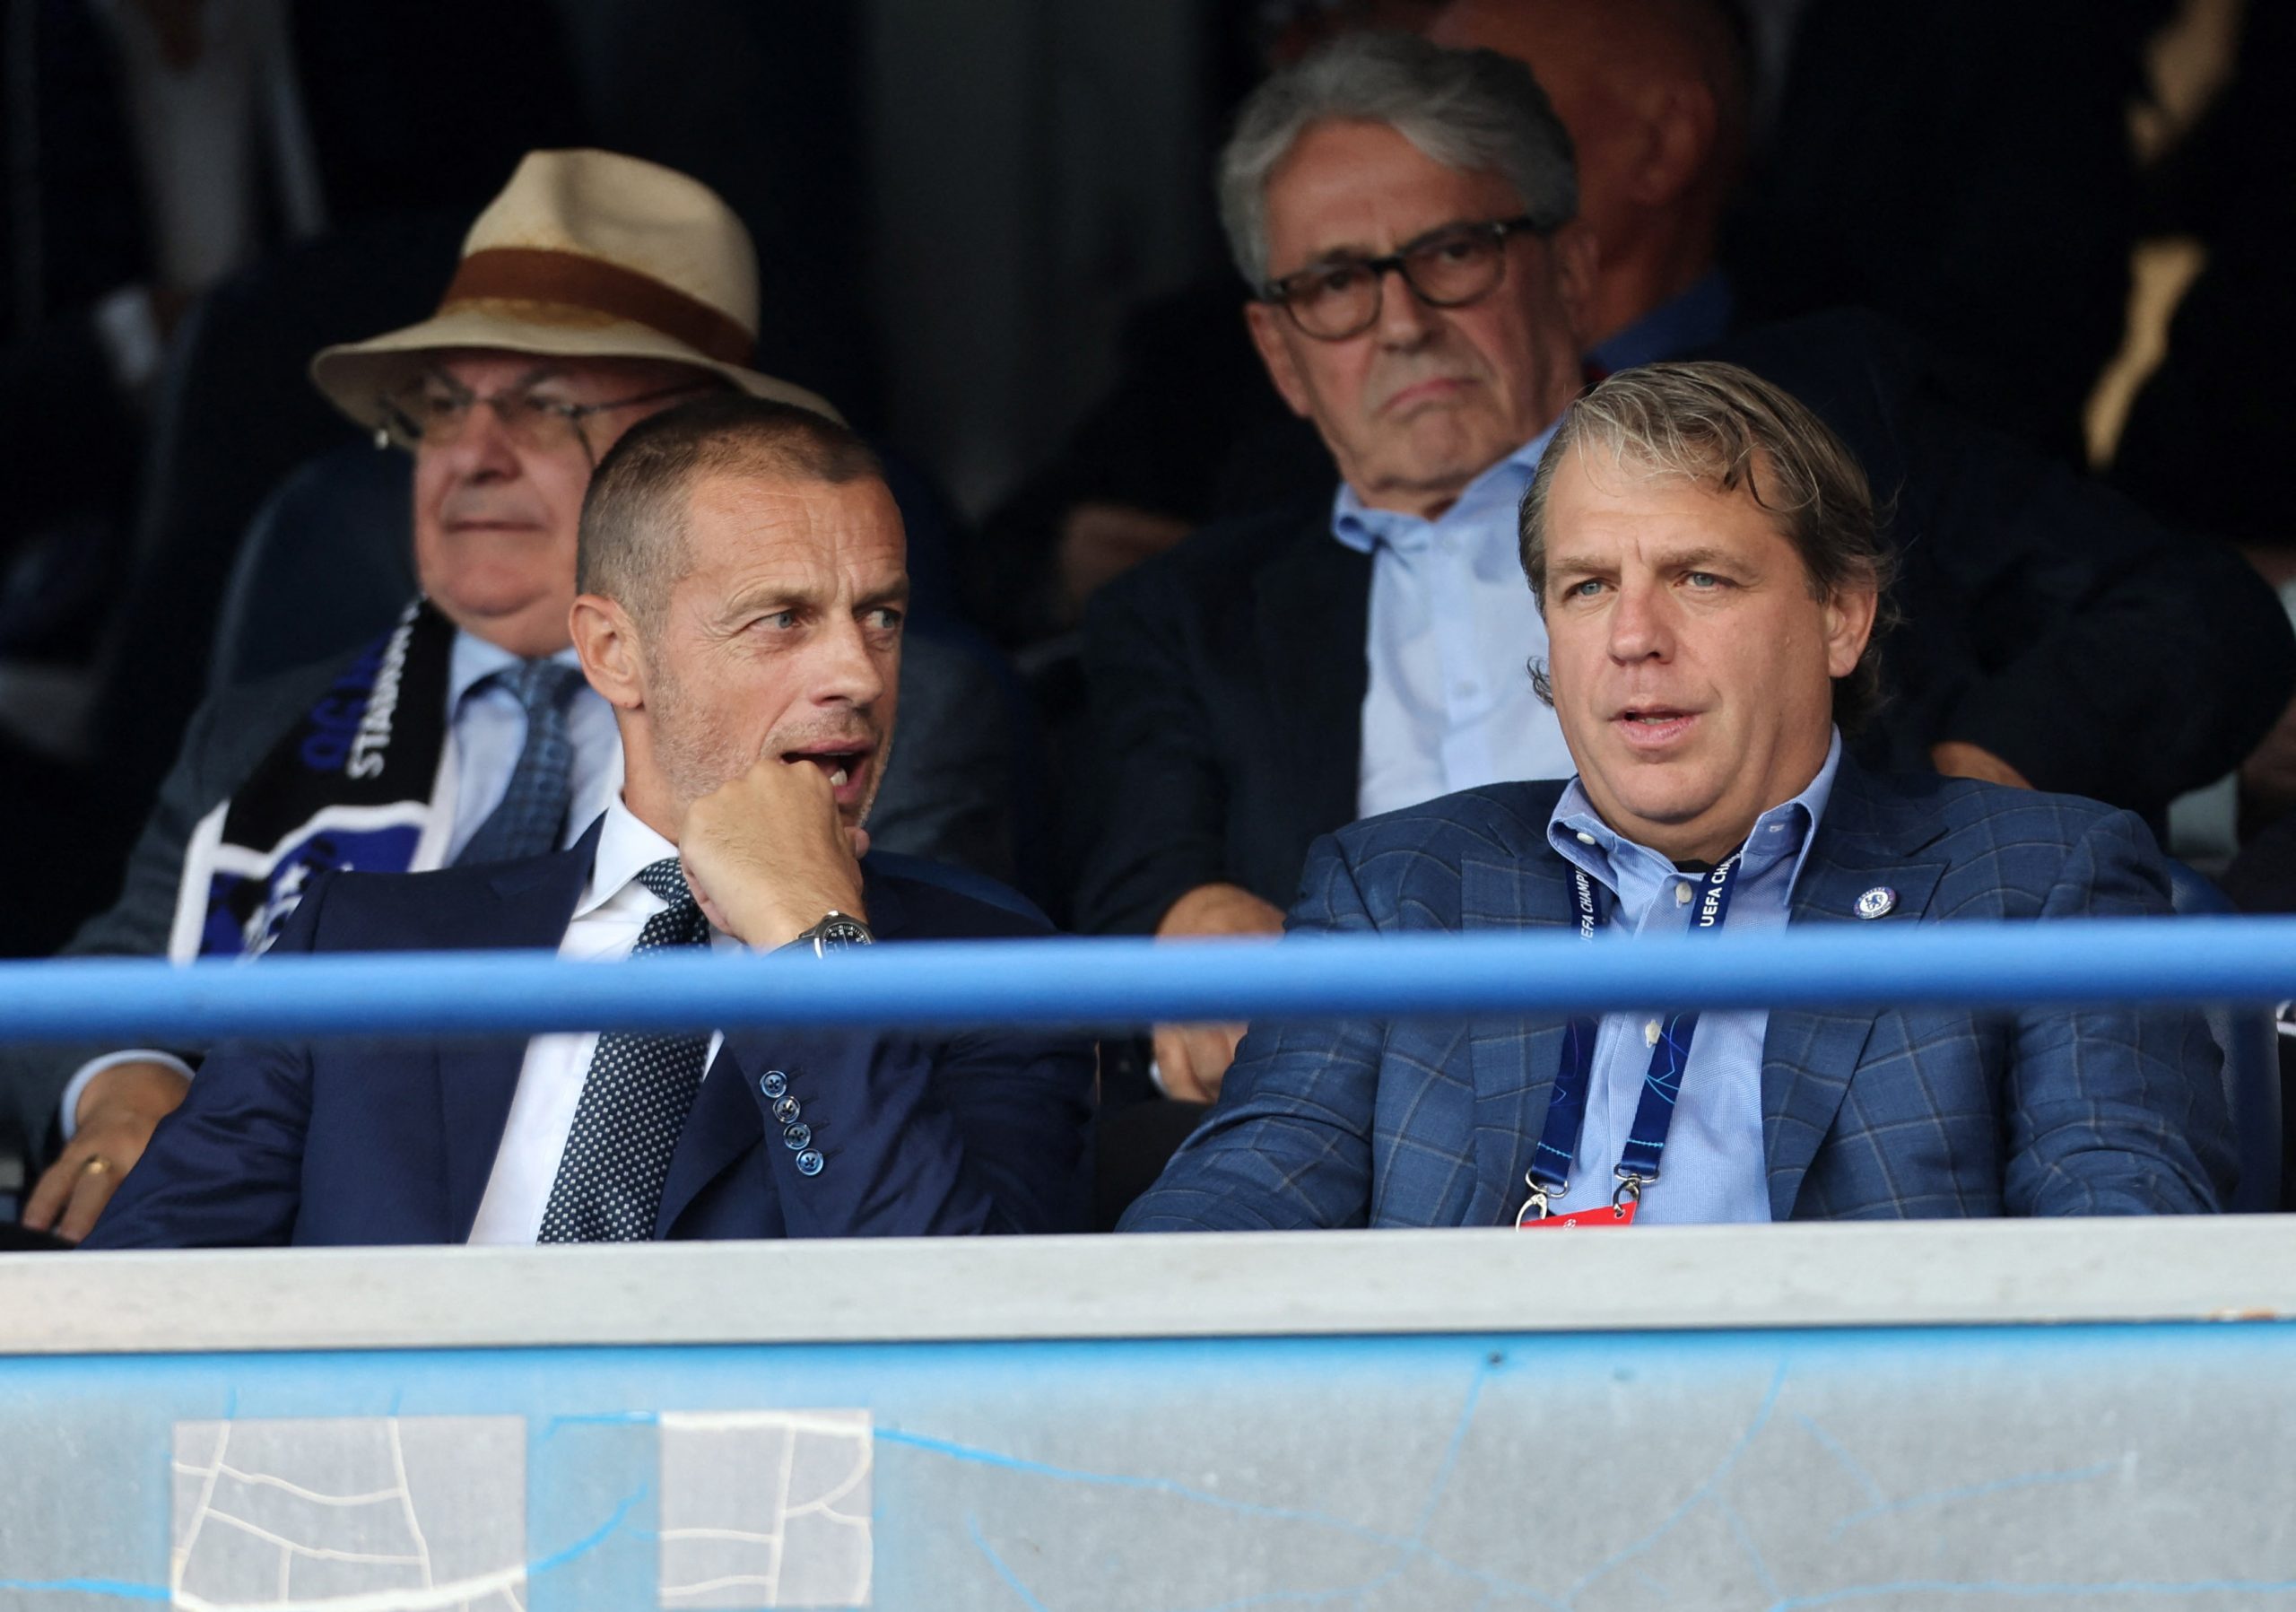 todd-boehly-chelsea-transfer-news-graham-potter-sporting-director-luis-campos-premier-league-champions-league-potter-signings-cfc-latest-news-stamford-bridge